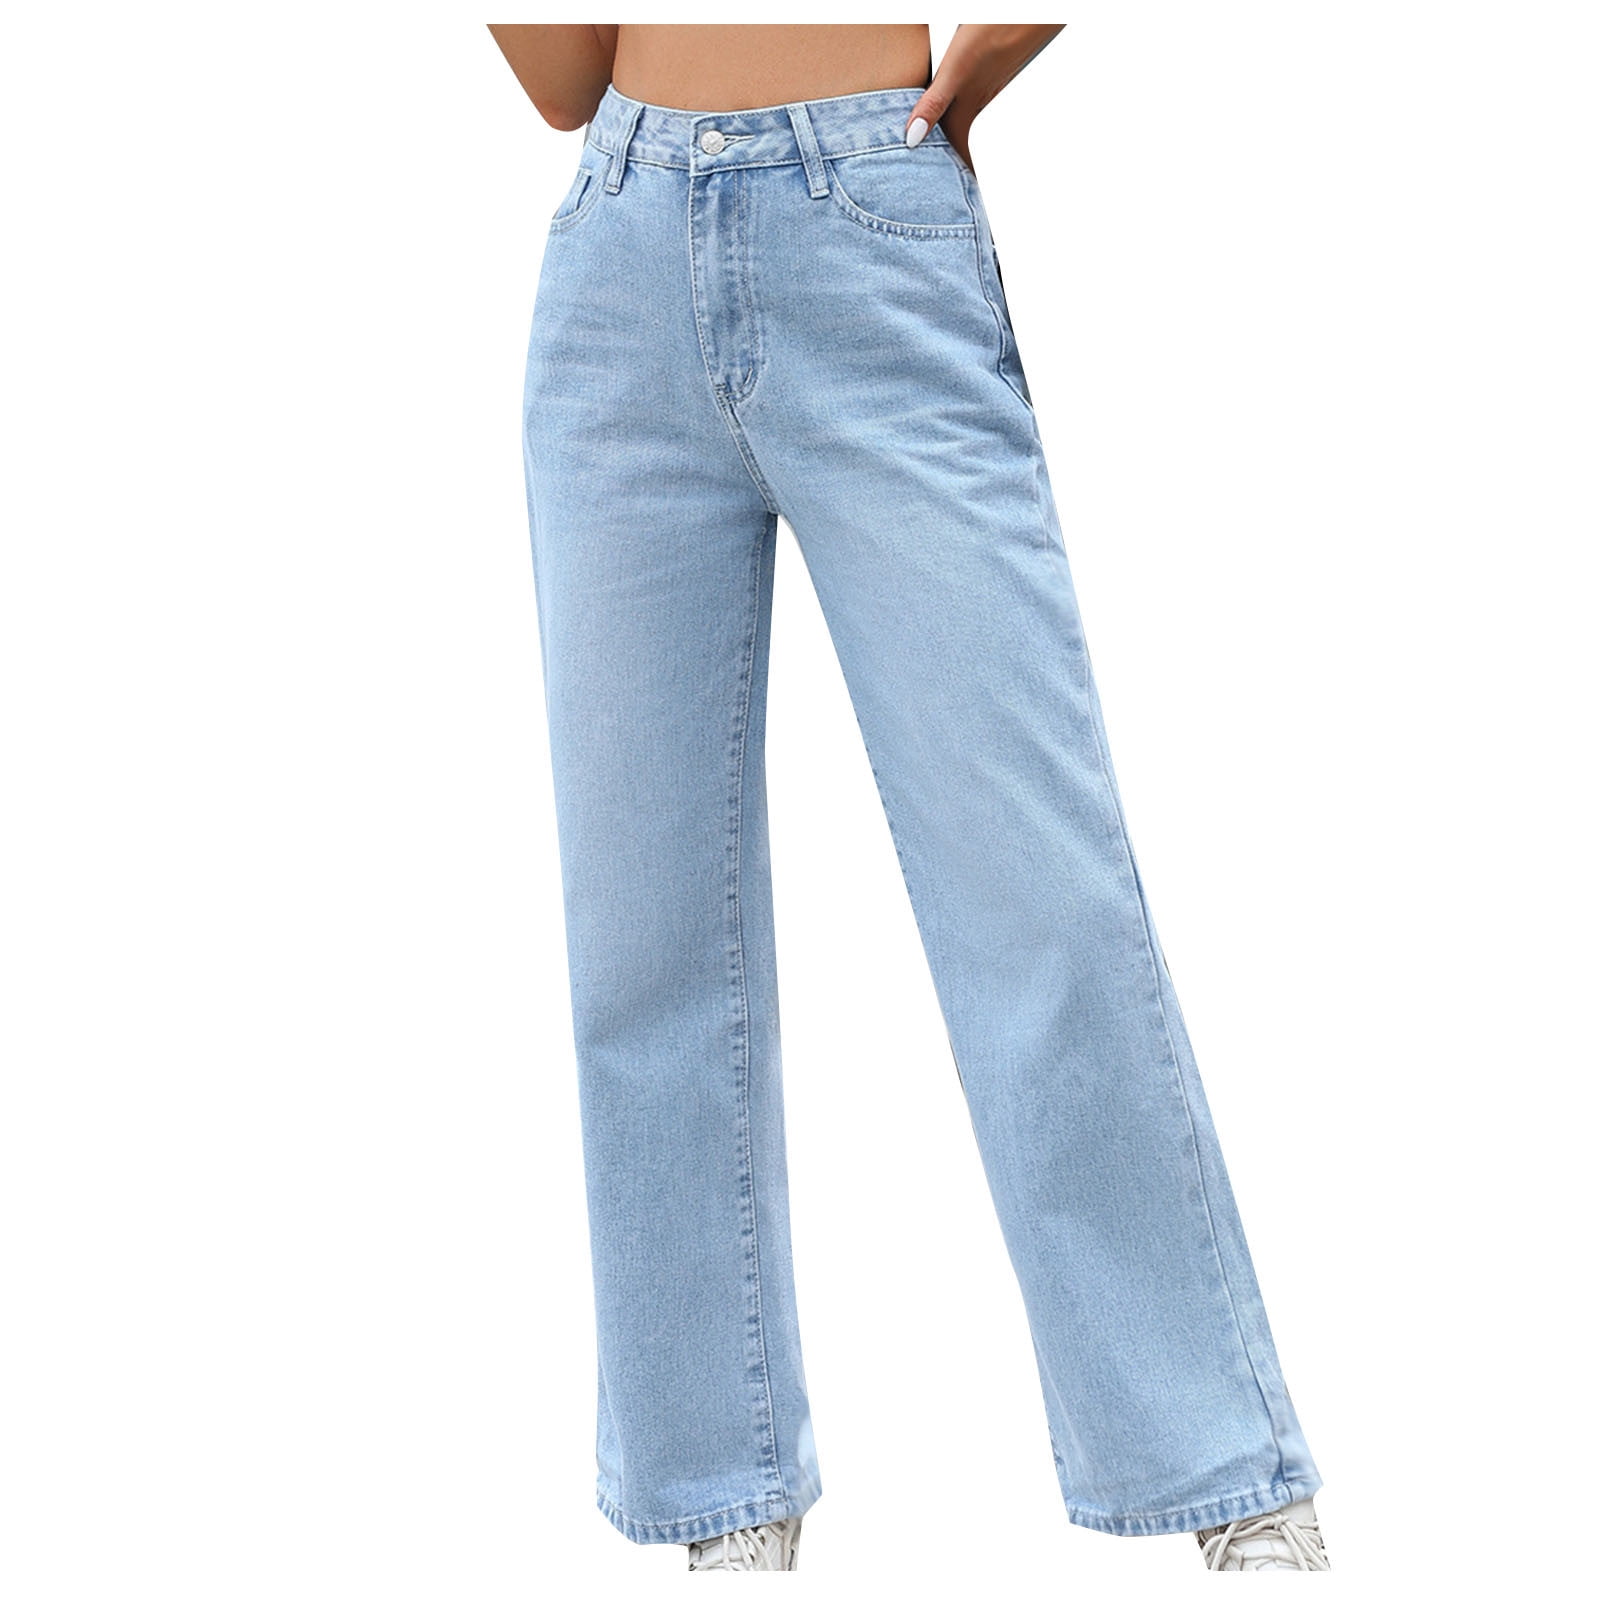 Wide Leg Jeans for Women High Waisted Button Fly Stretch Jeans Casual Baggy  Washed Straight Denim Pants with Pocket 